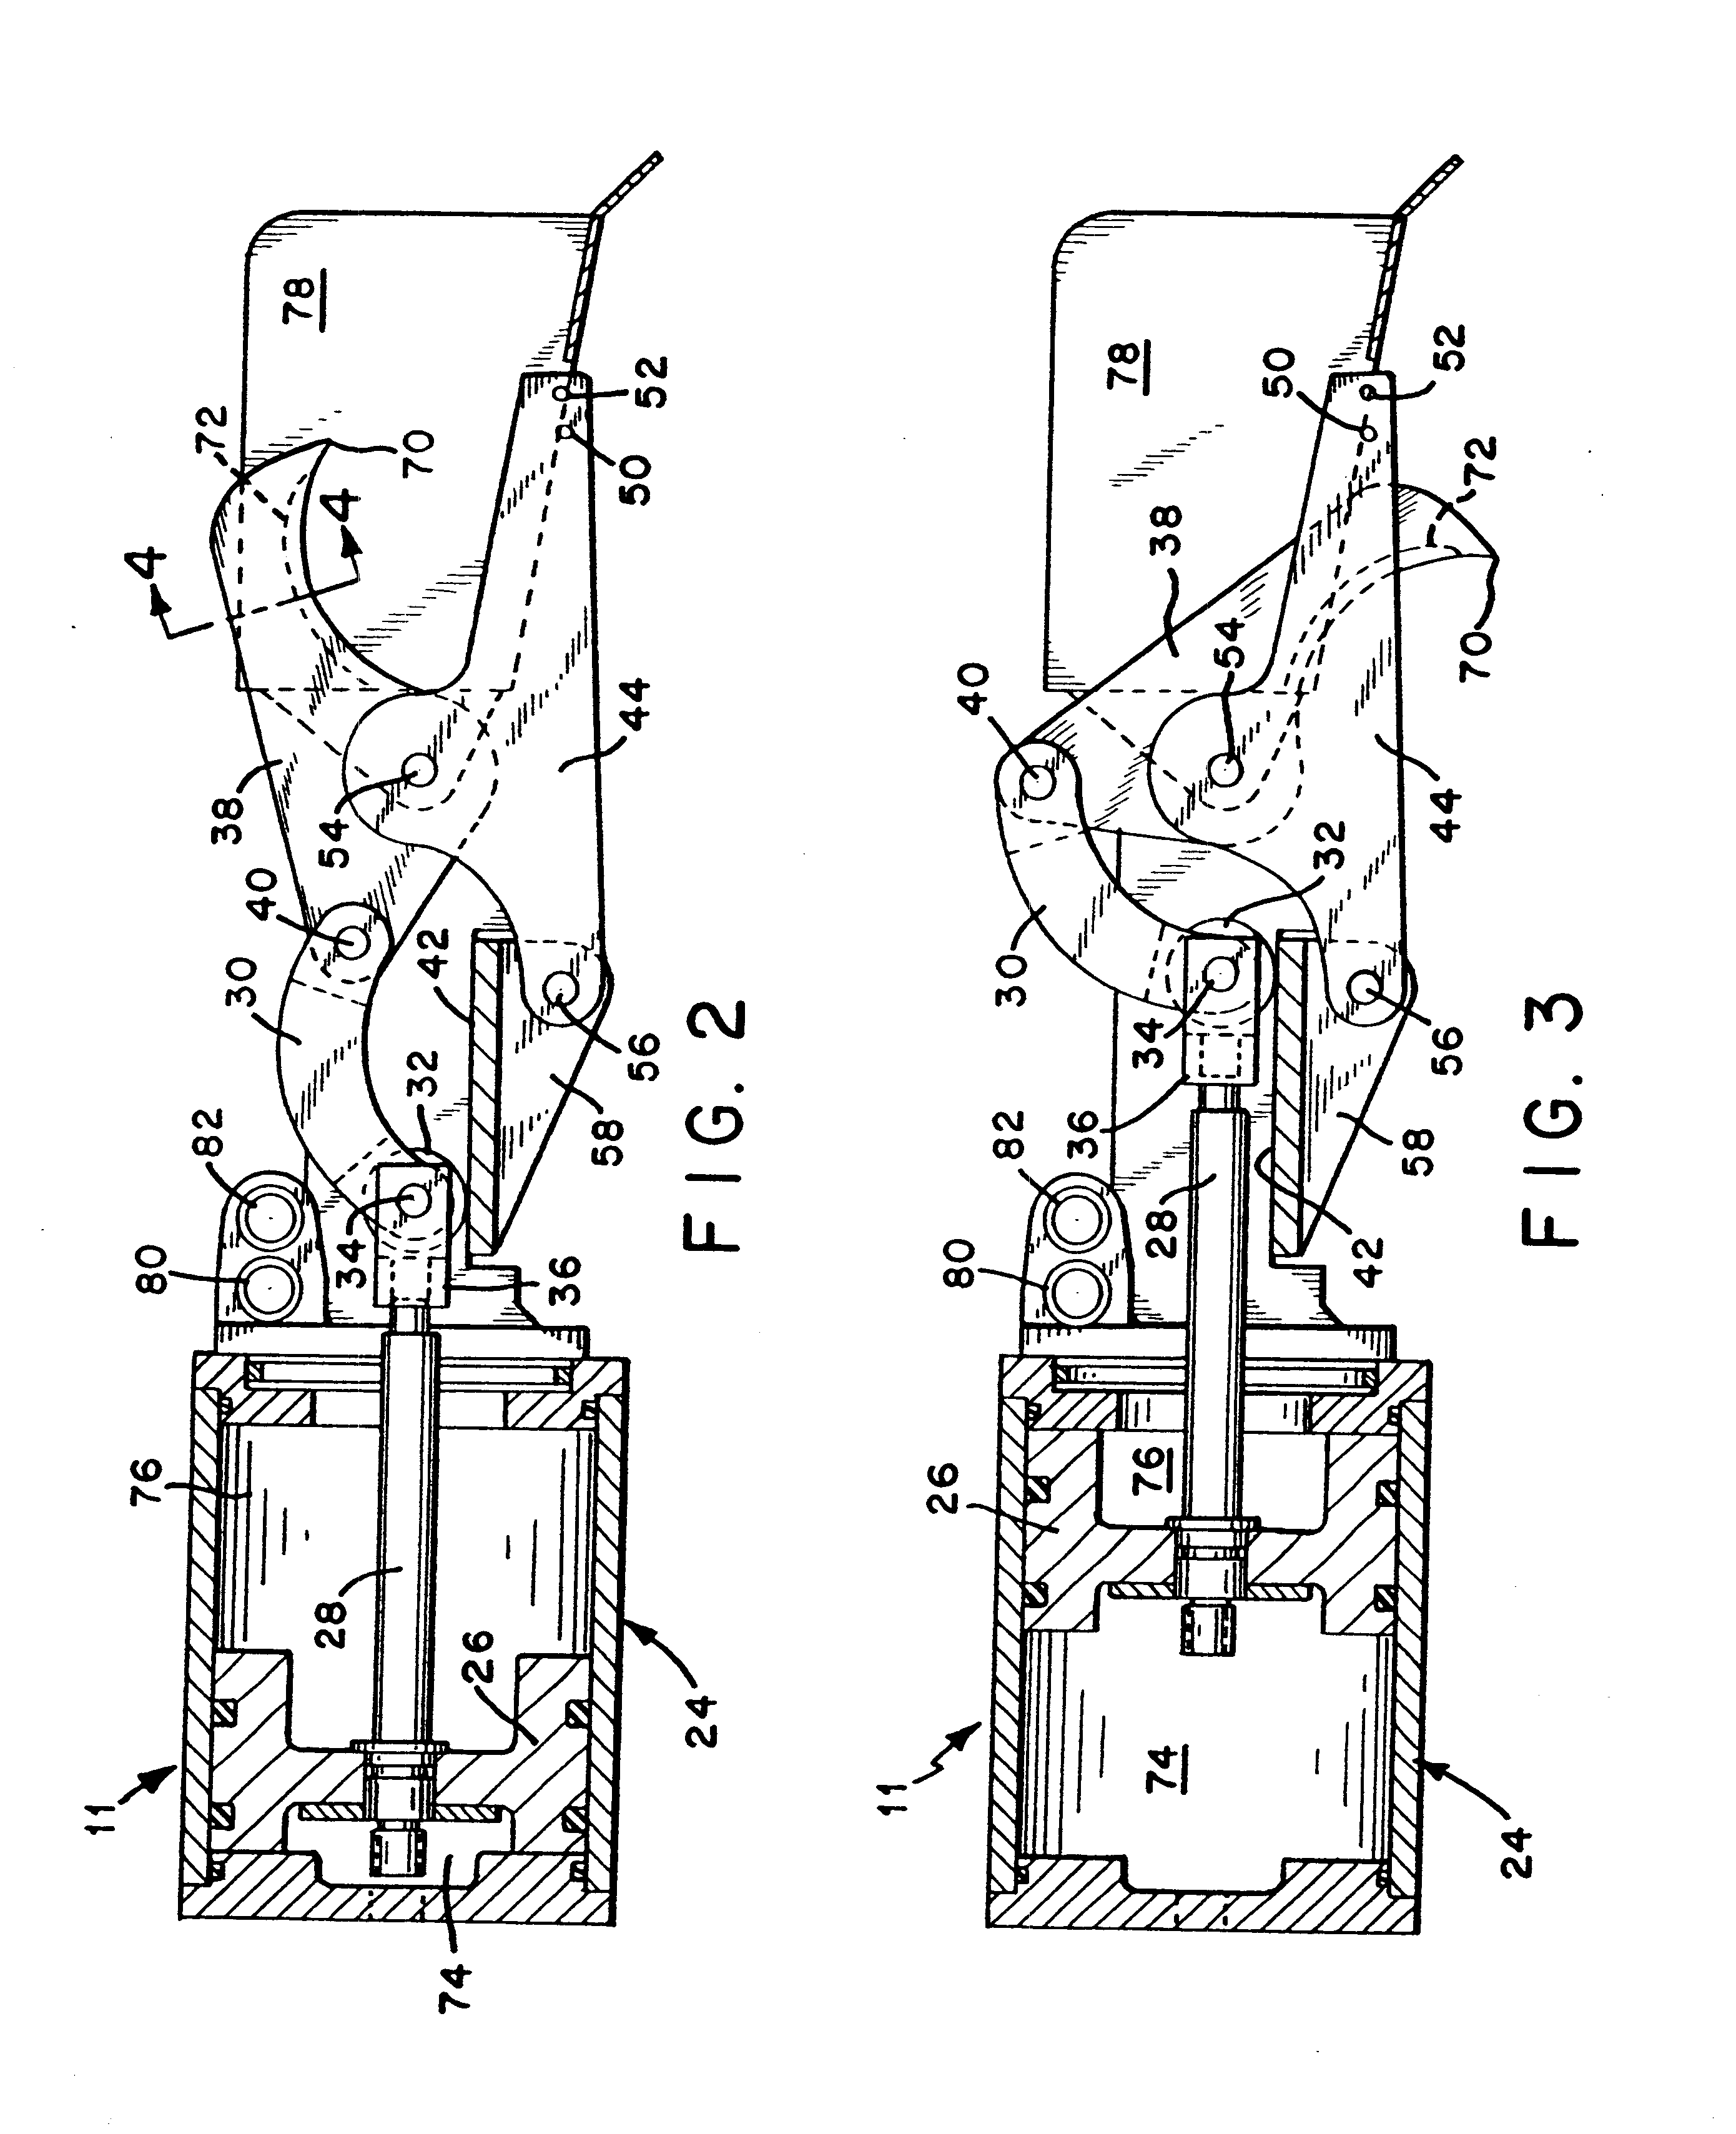 Toe web cutter with stationary blade unit